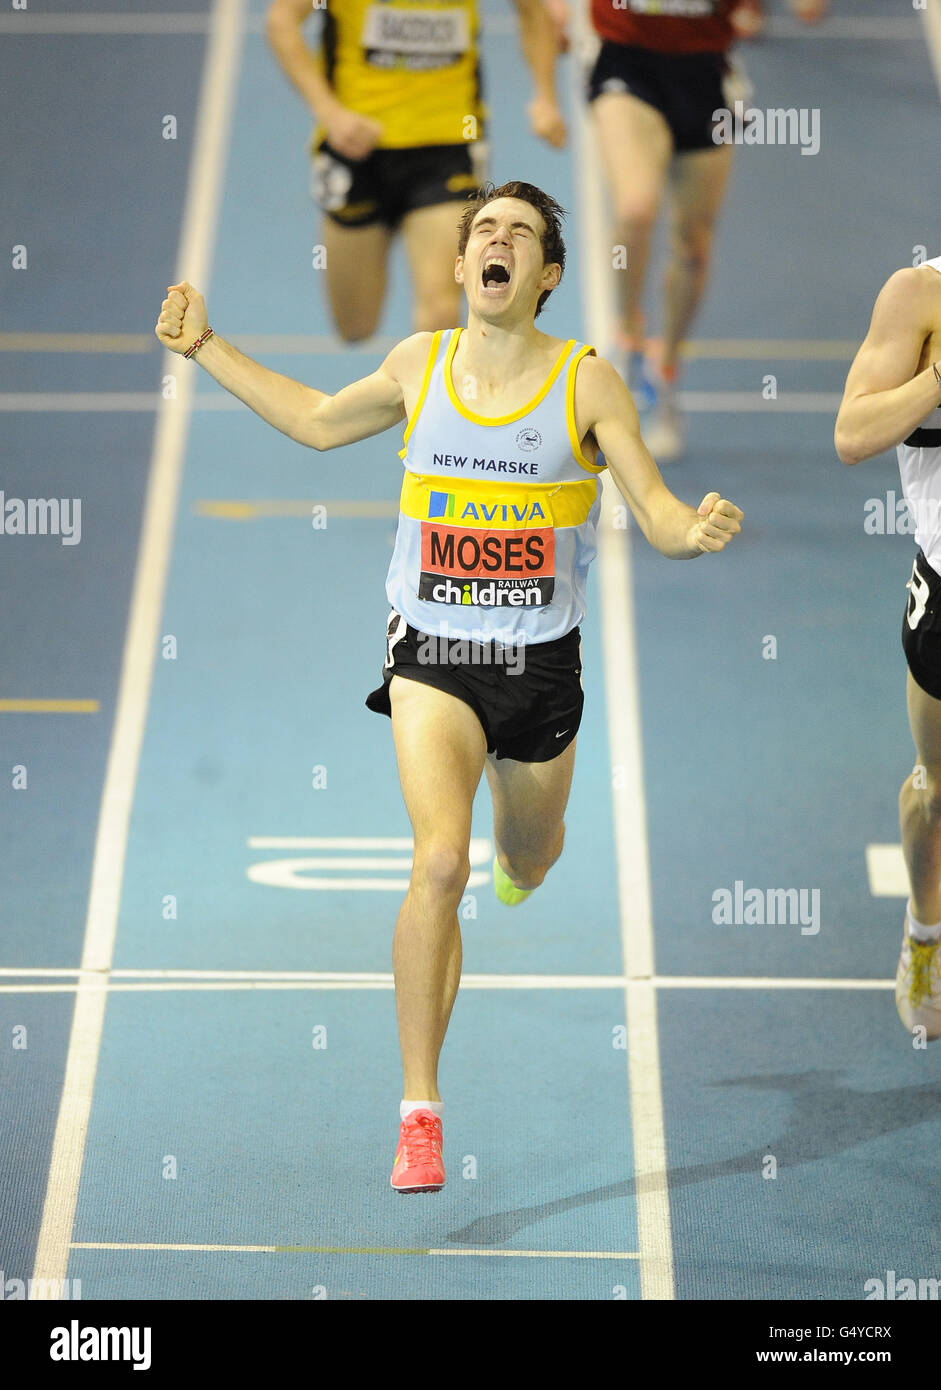 Lewis Moses celebrates as he wins the Men's 1500m final Stock Photo